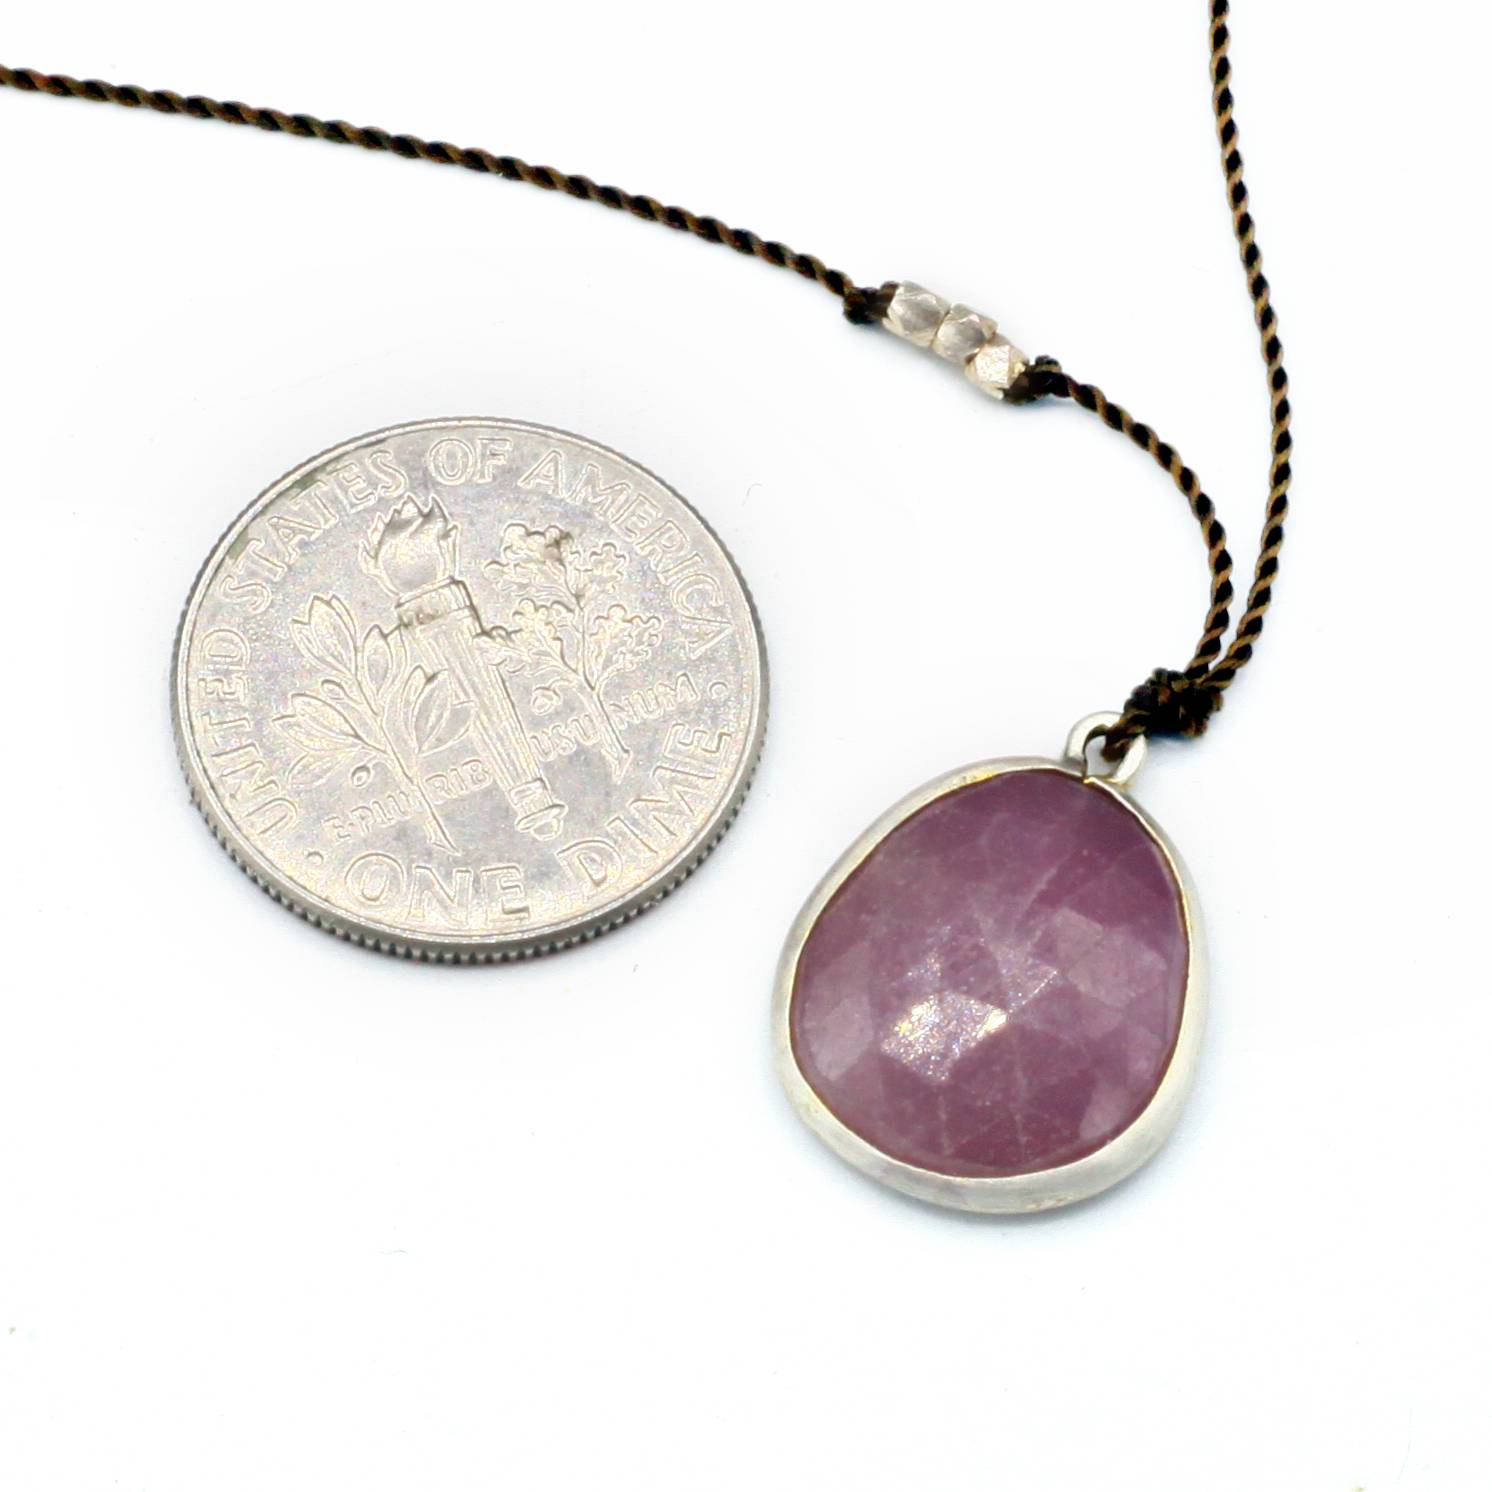 Margaret Solow Jewelry | Pink Sapphire + Sterling Silver Necklace | Firecracker